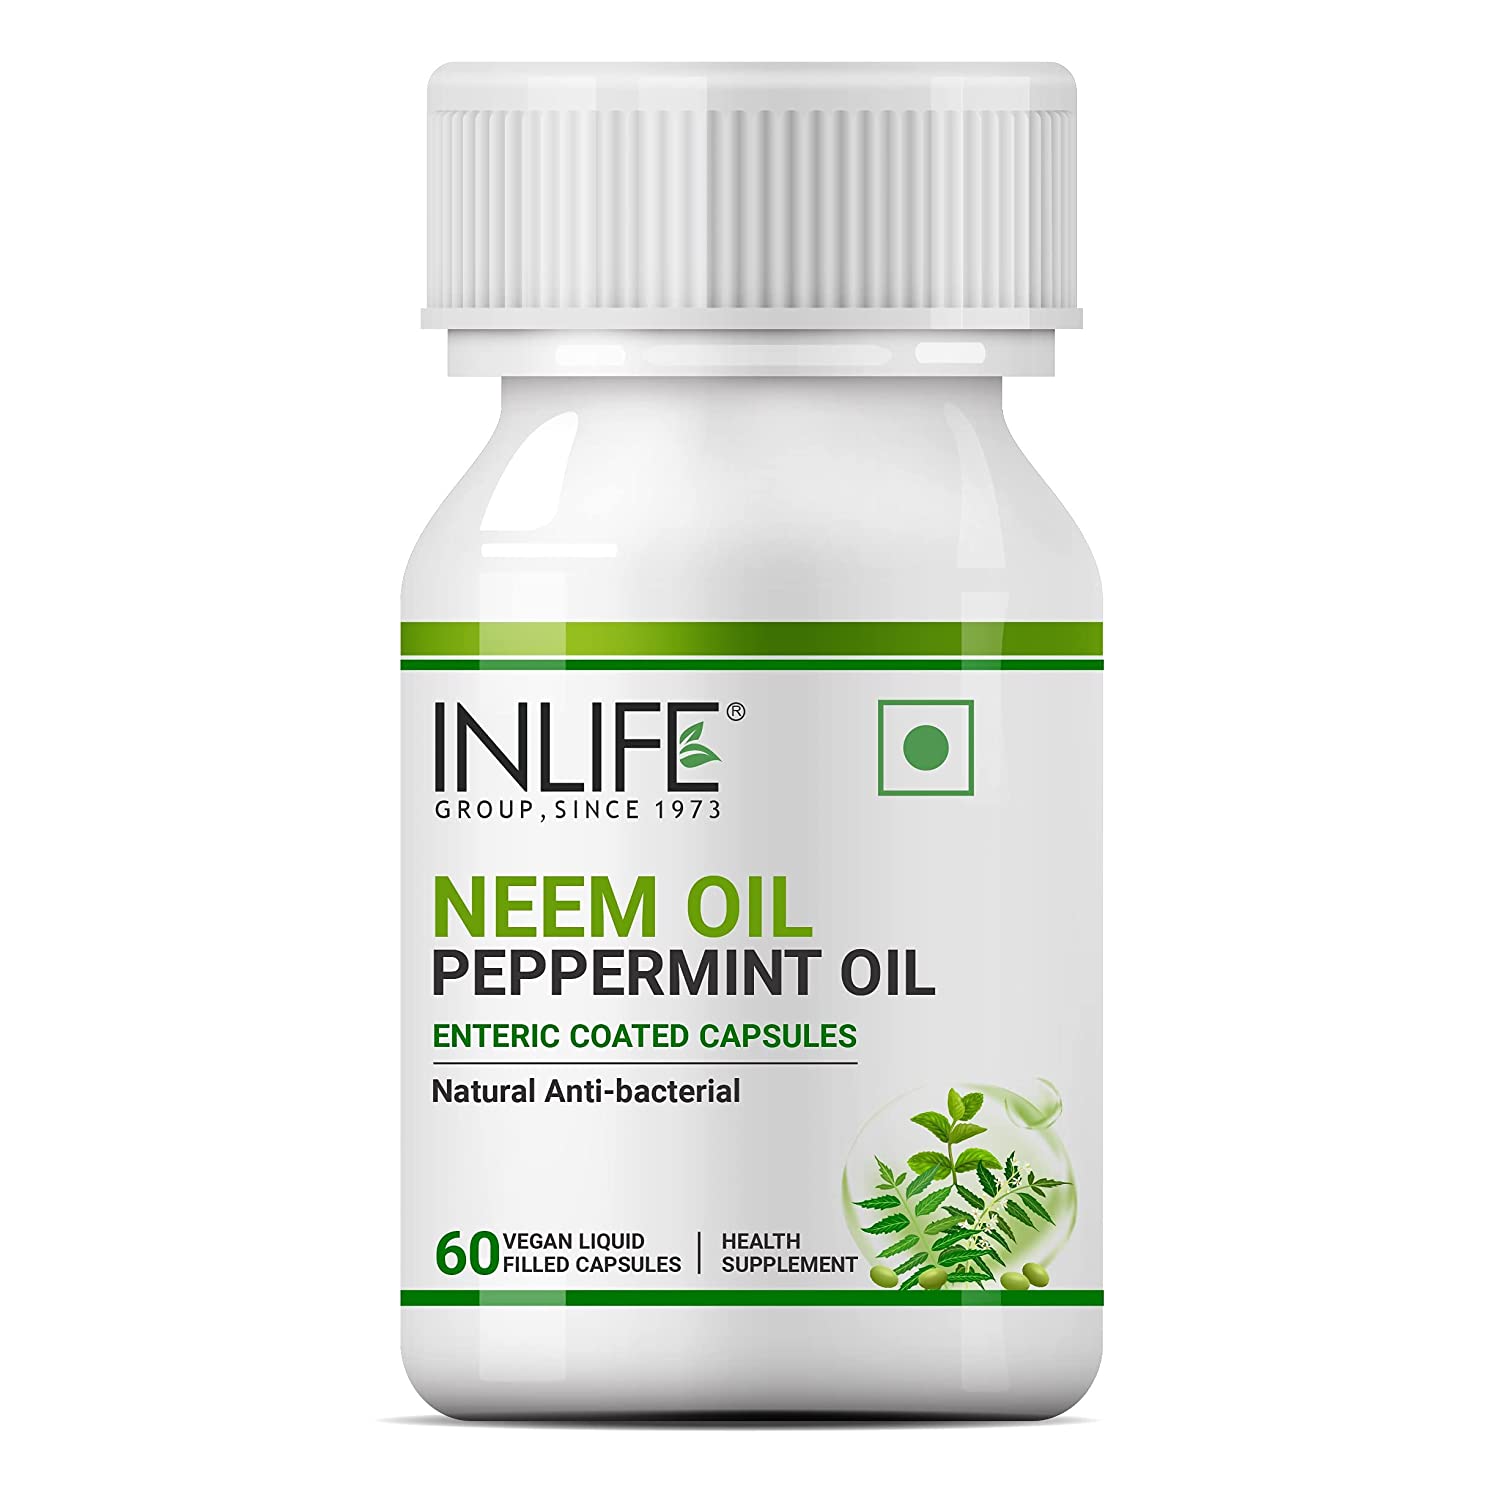 Inlife Neem Oil Peppermint Oil Image